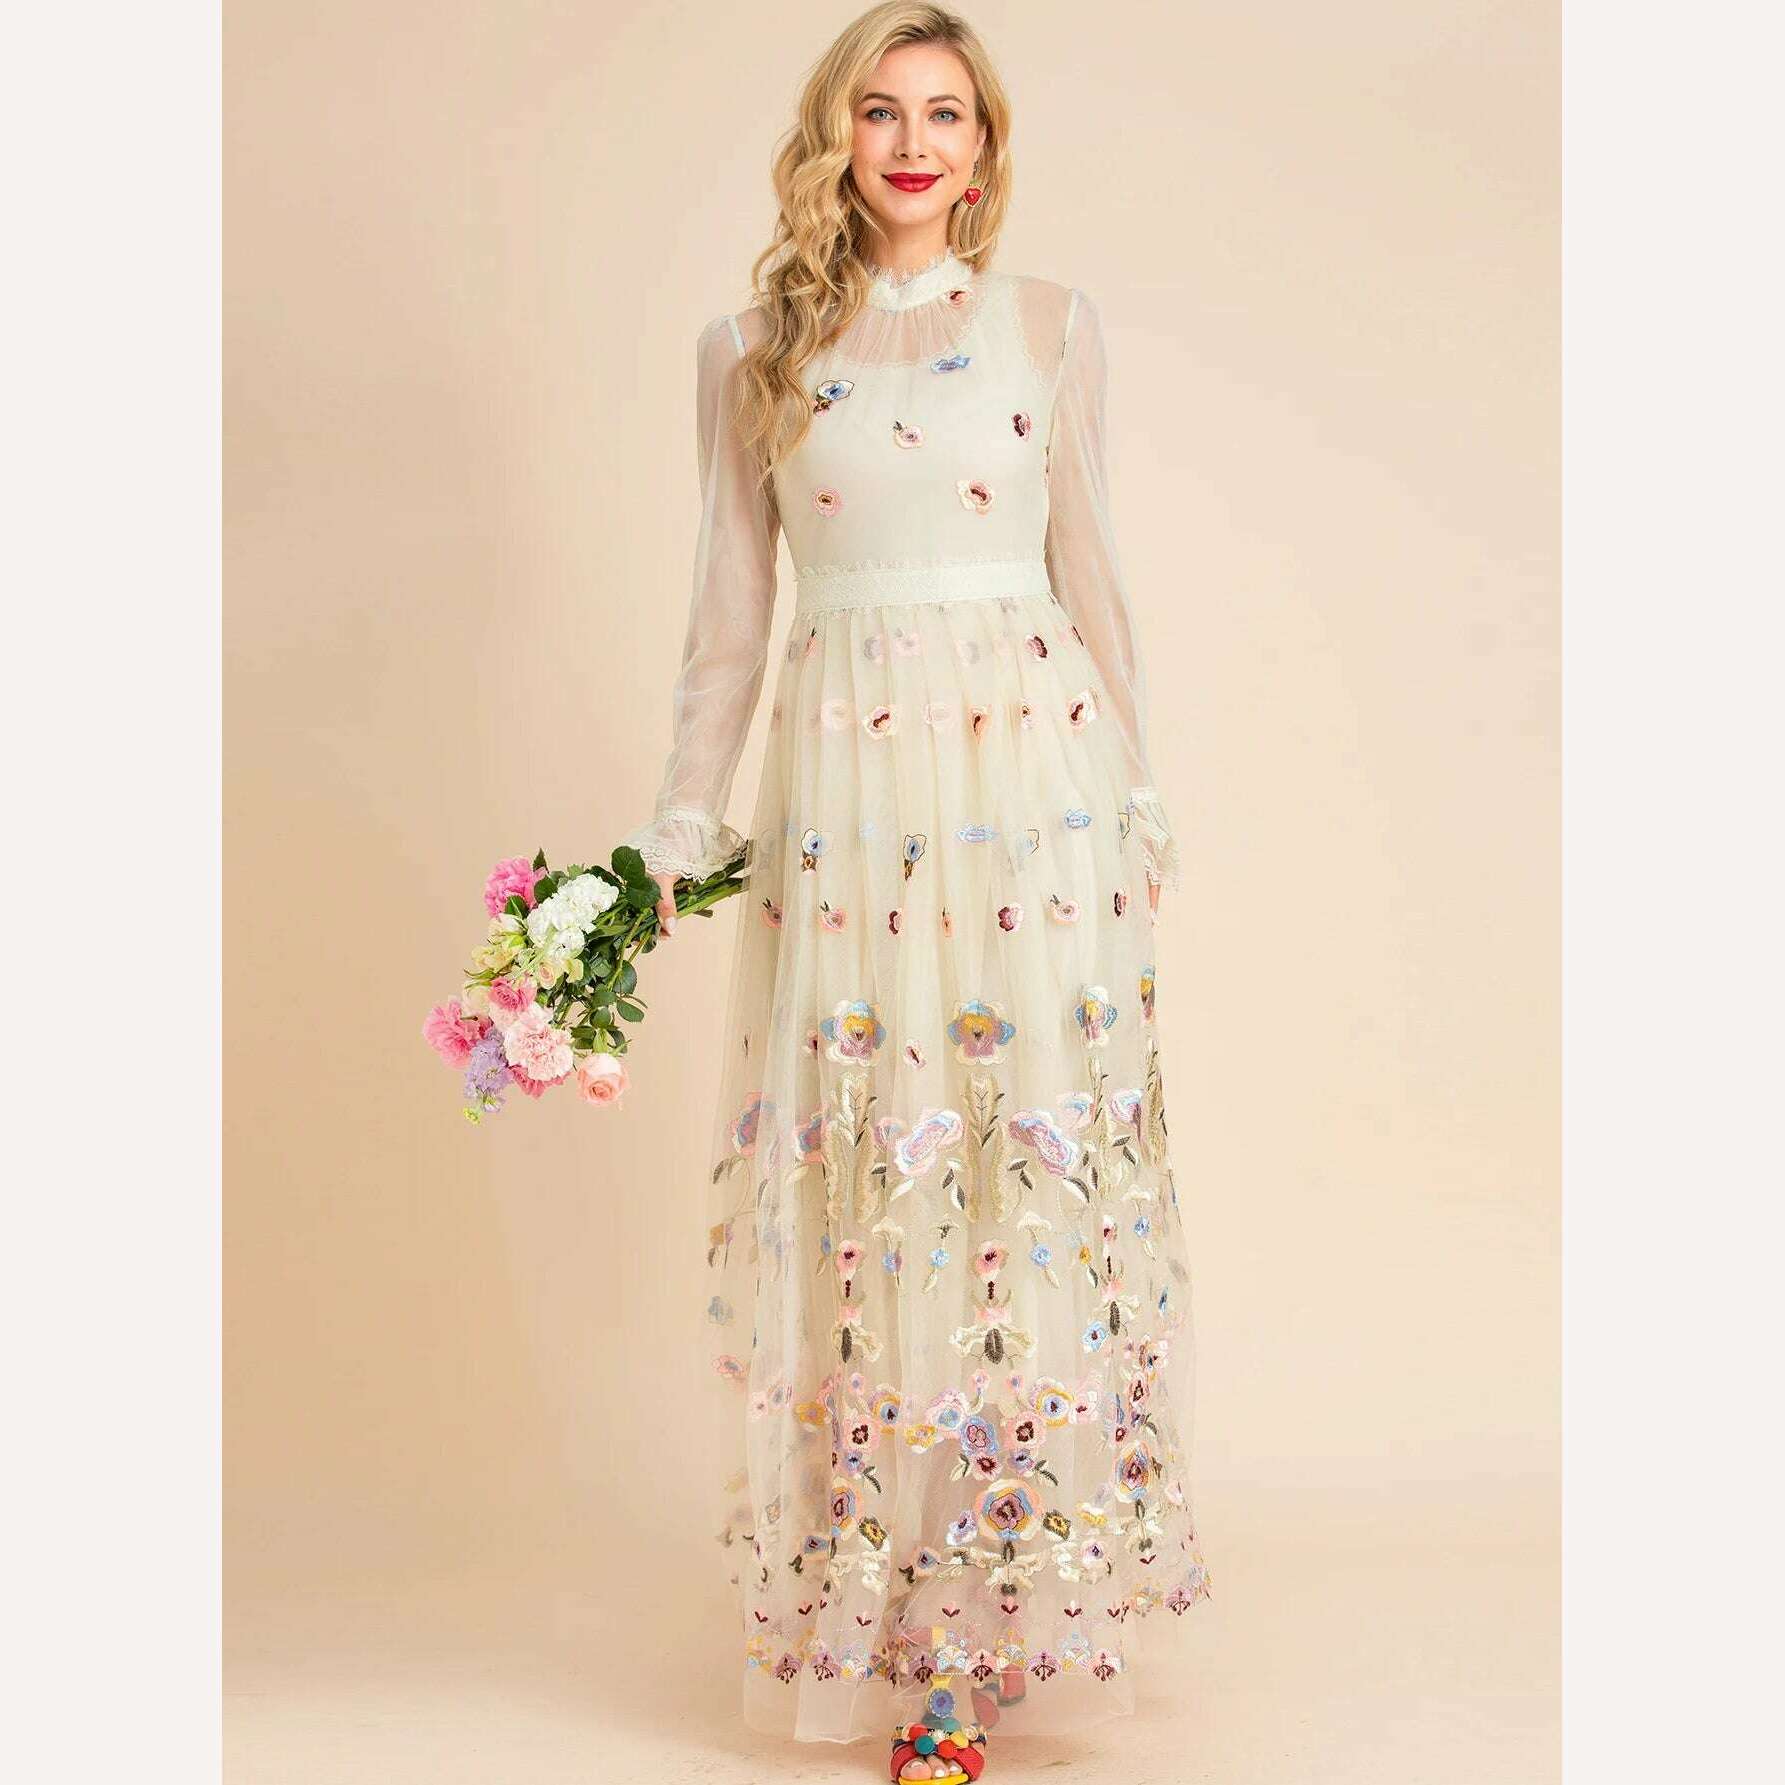 KIMLUD, LD LINDA DELLA 2022 Summer Runway Maxi Vintage Party Dress Women's Stand collar Flare Sleeve Mesh Flowers Embroidery Long Dress, KIMLUD Womens Clothes